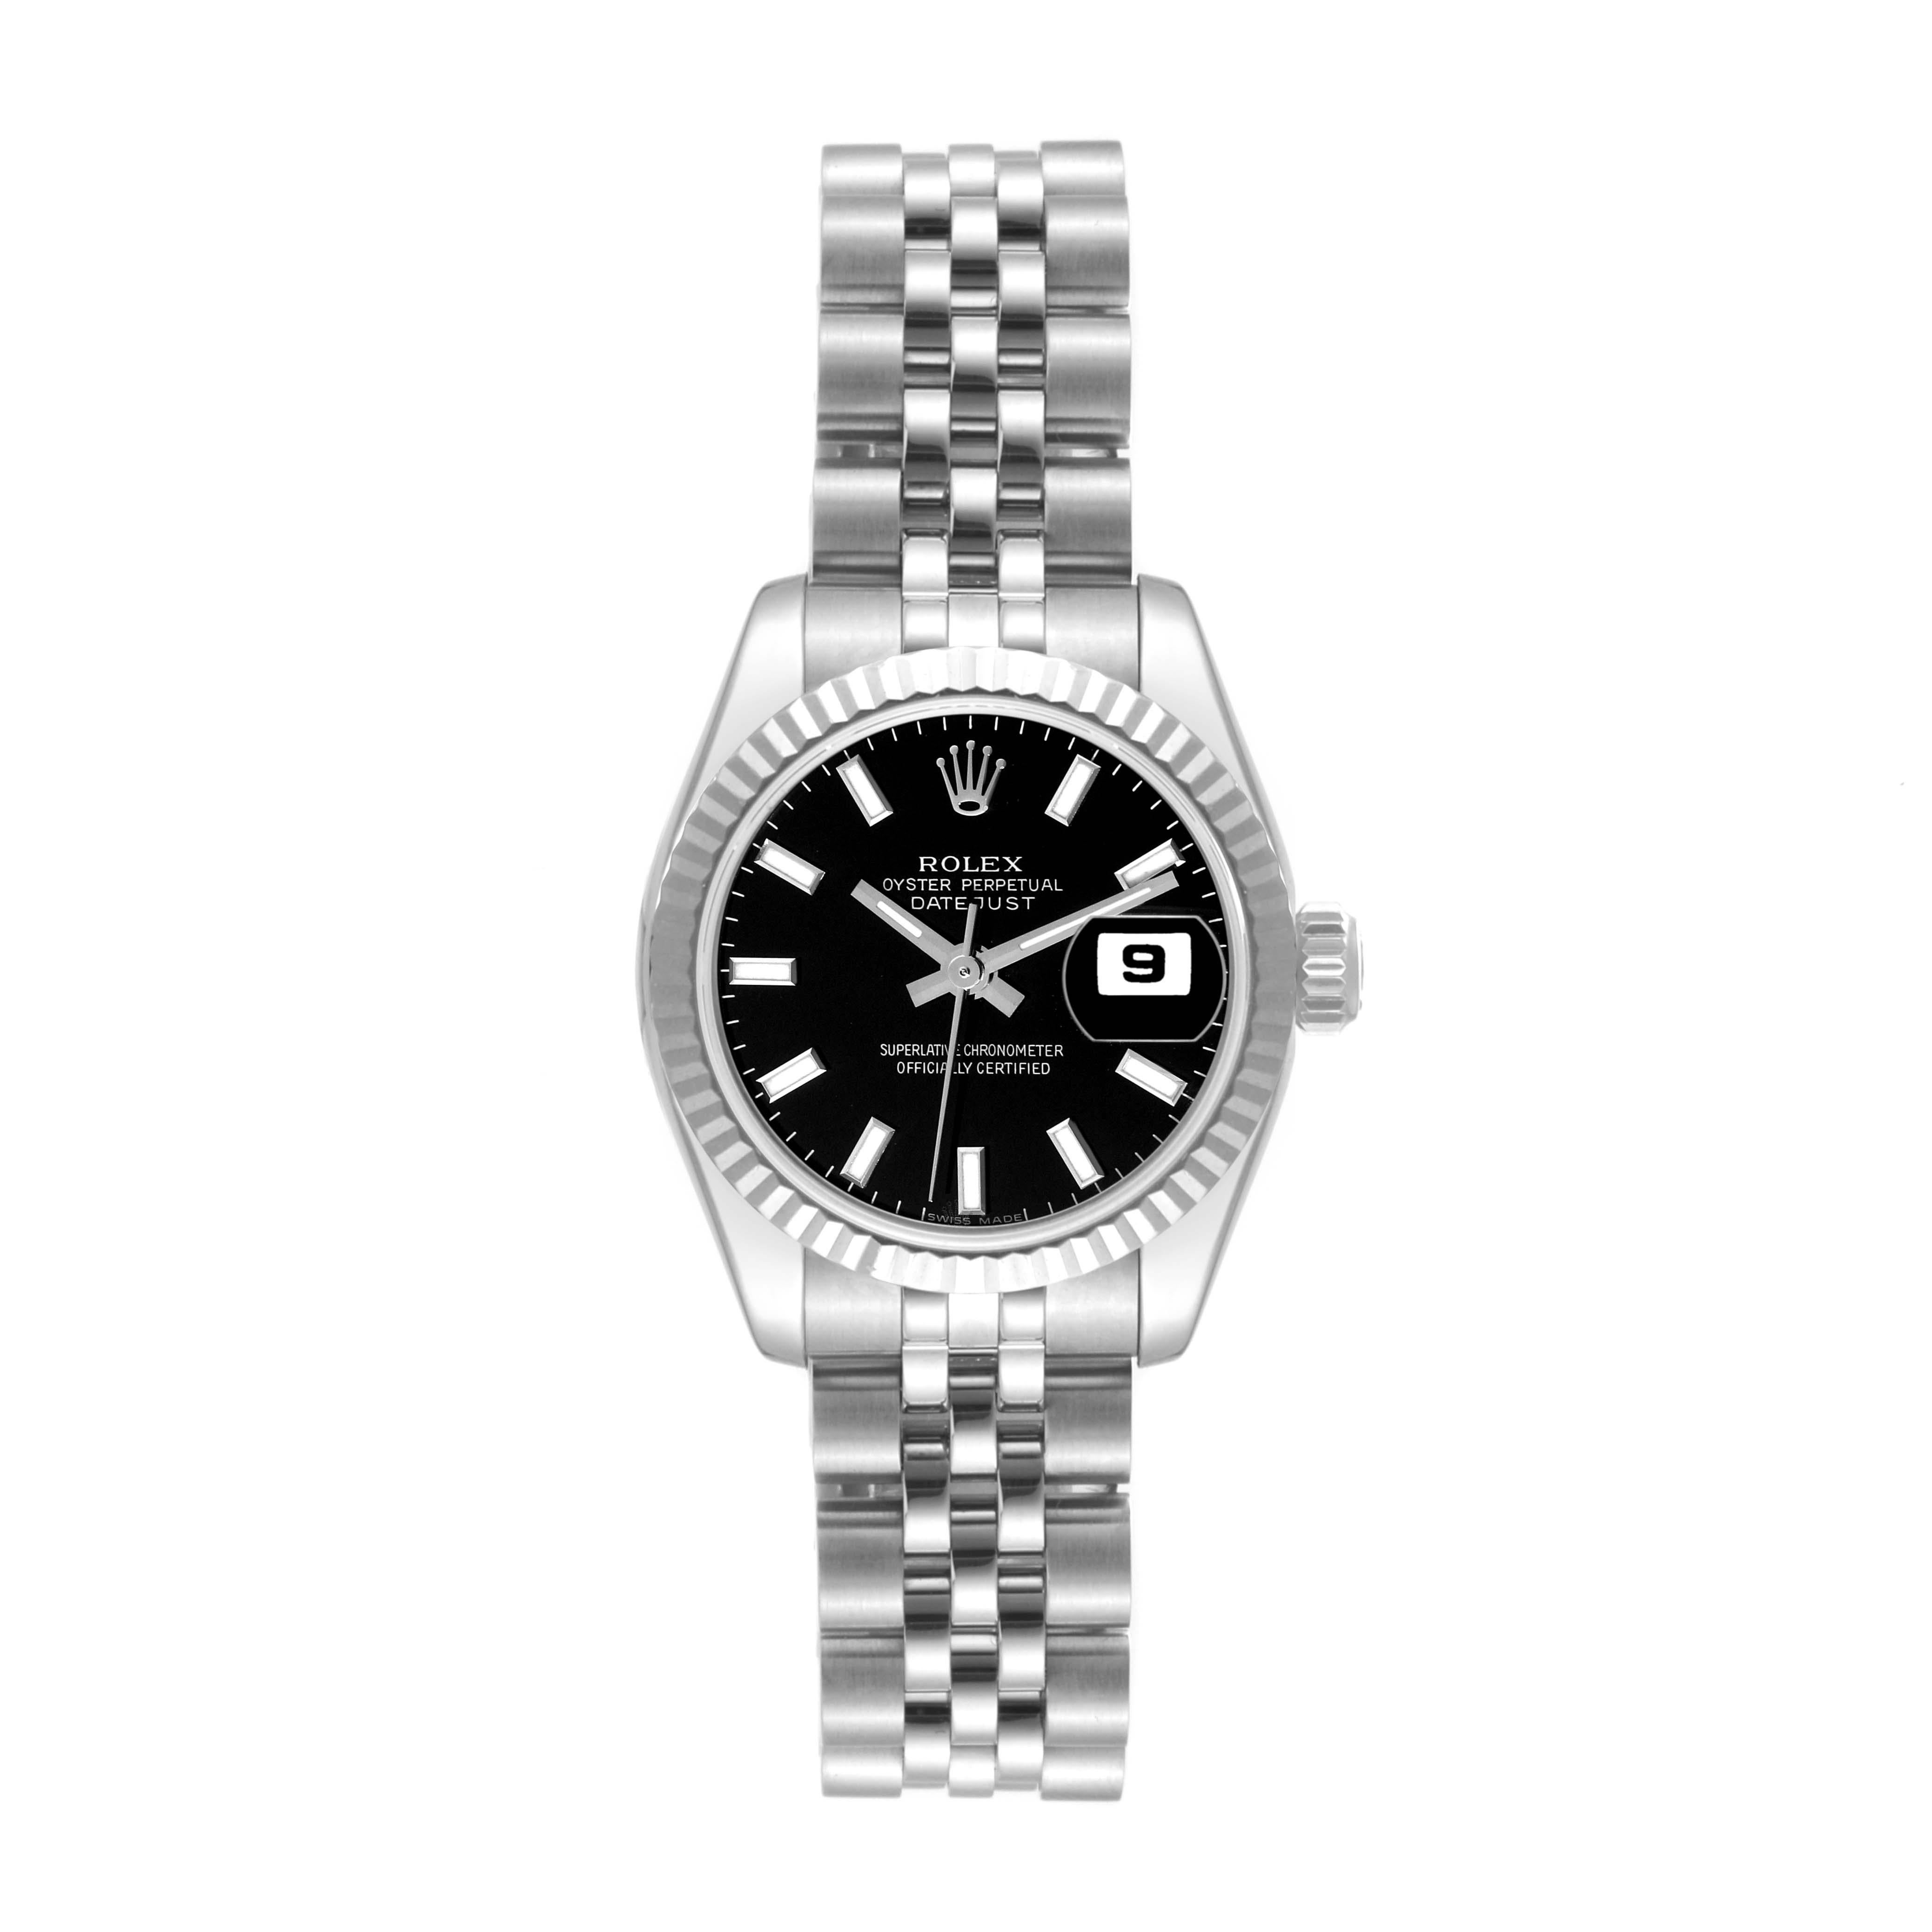 Women's Rolex Datejust Steel White Gold Black Dial Ladies Watch 179174 Box Papers For Sale